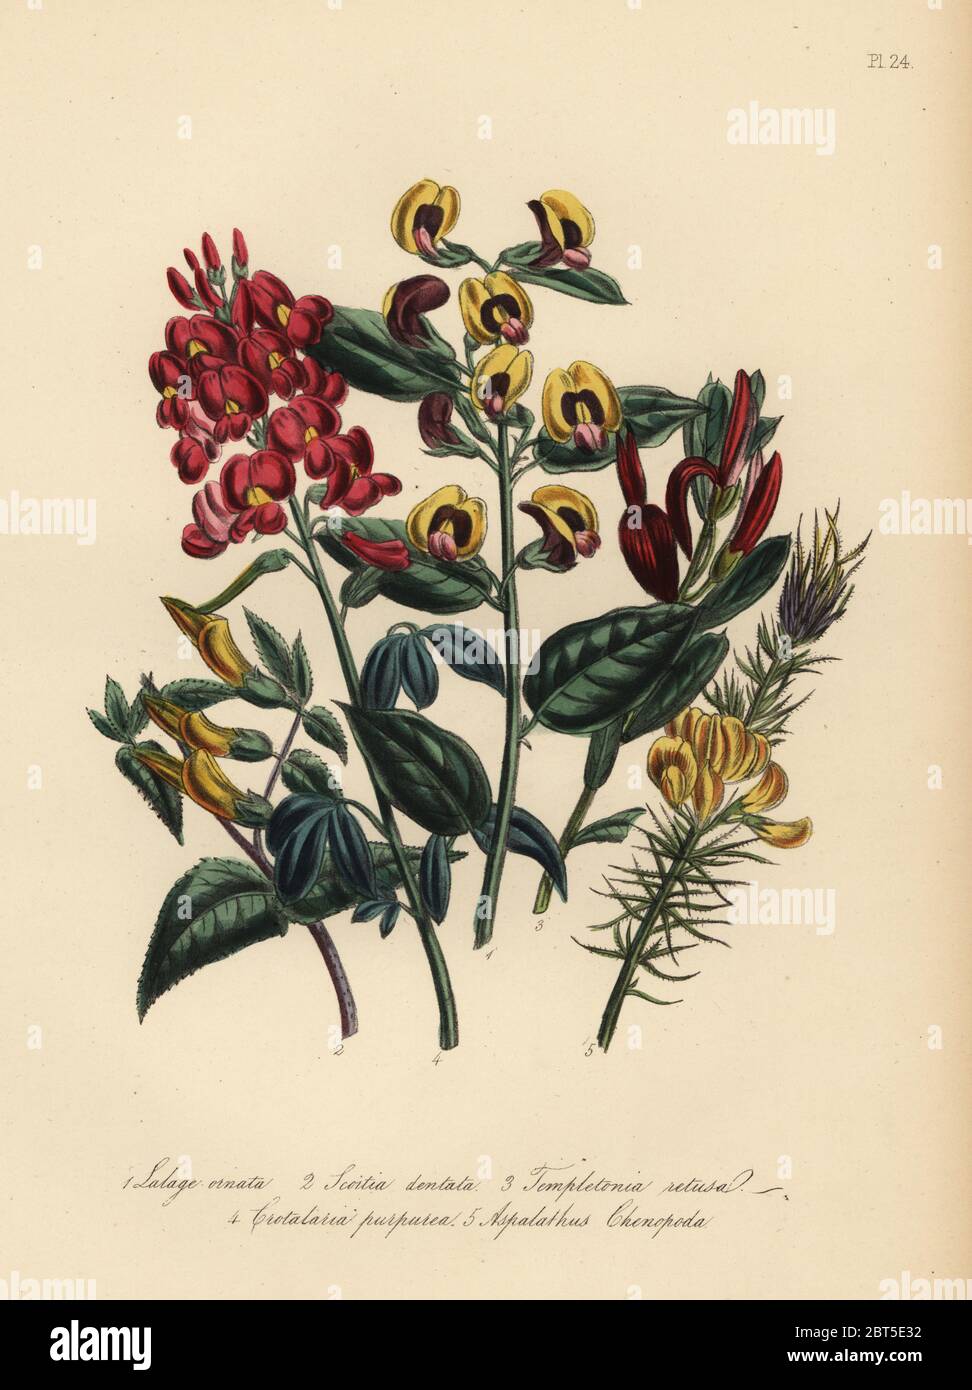 Ornamental lalage, Lalage ornata, tooth-leaved scottia, Scottia dentata, retuse-leaved templetonia, Templetonia retusa, purple crotalaria, Crotalaria purpurea, and goose-foot aspalathus, Aspalathus chenopoda. Handfinished chromolithograph by Henry Noel Humphreys after an illustration by Jane Loudon from Mrs. Jane Loudon's Ladies Flower Garden or Ornamental Greenhouse Plants, William S. Orr, London, 1849. Stock Photo